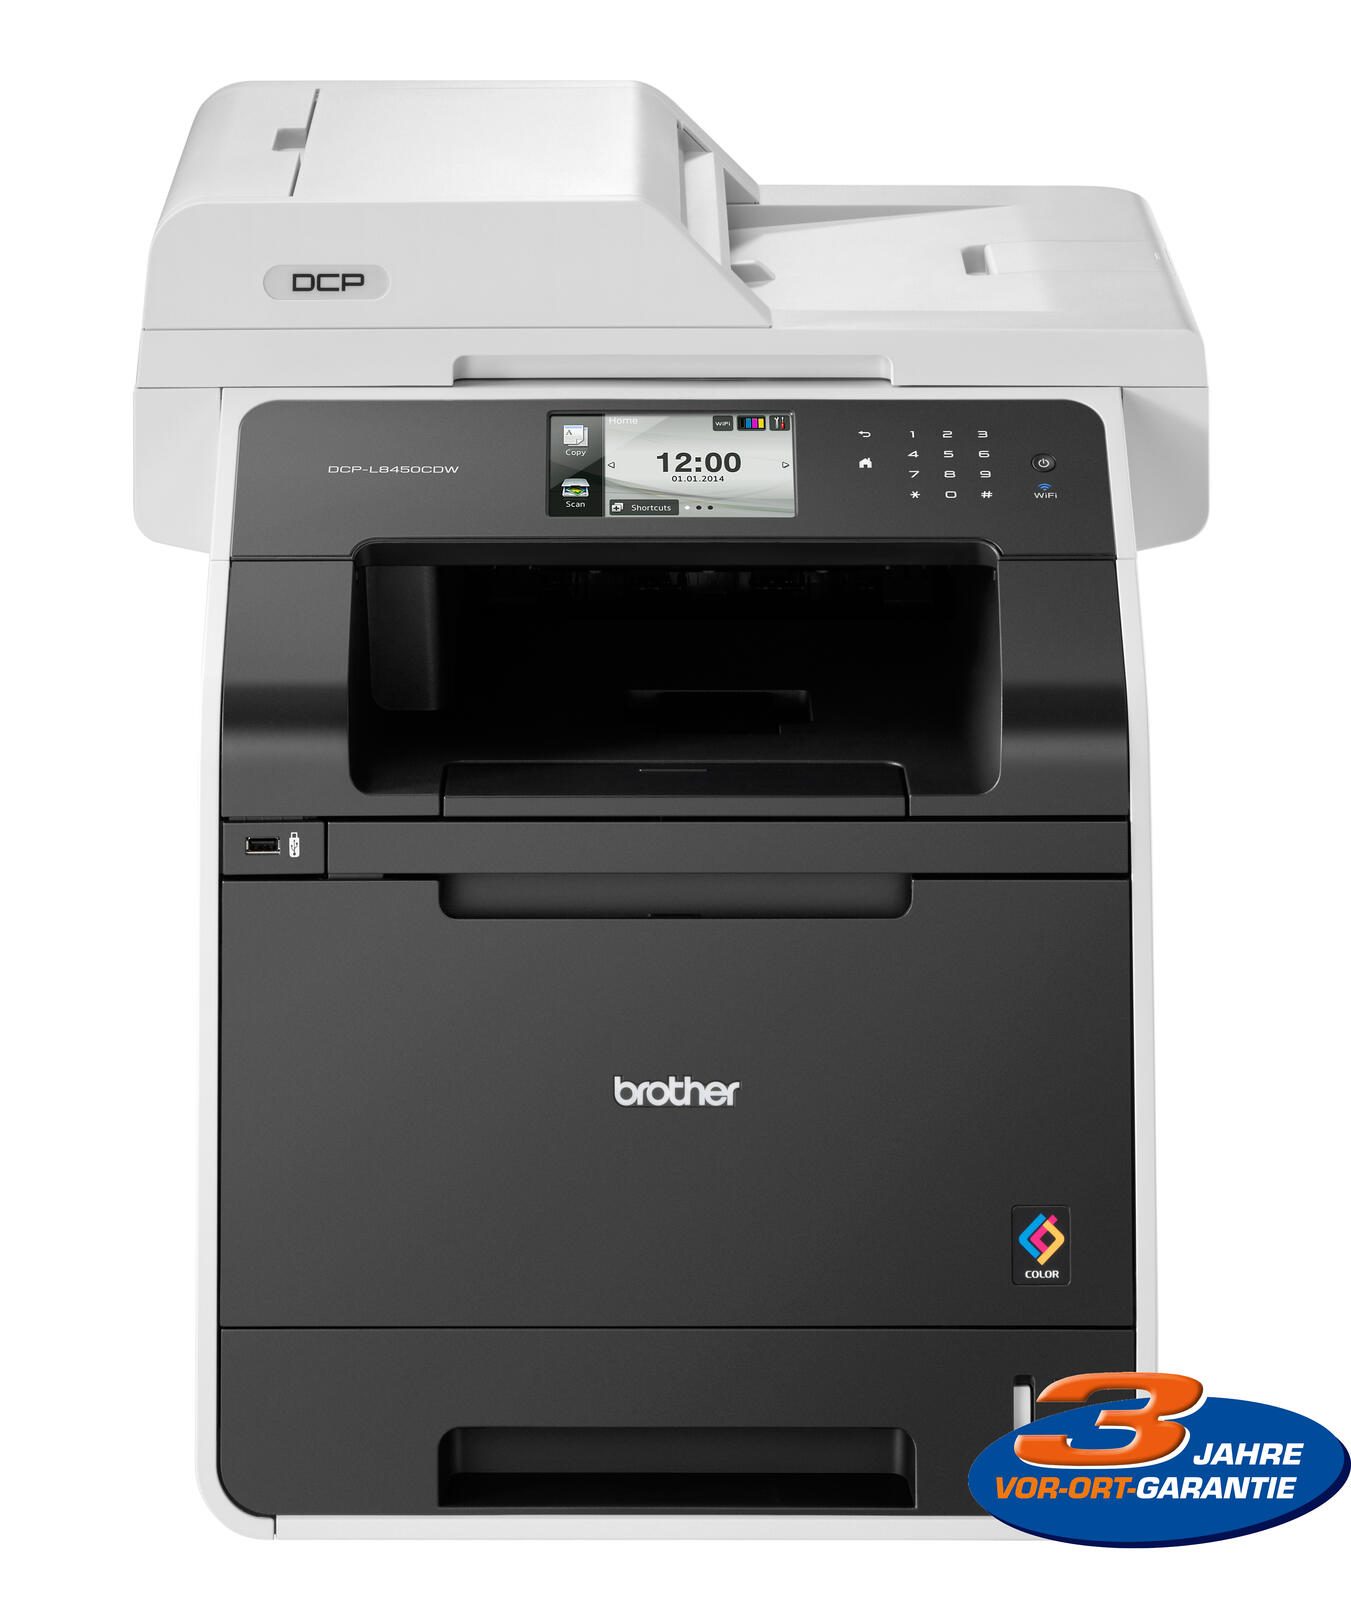 Brother DCP-L 8450 CDW